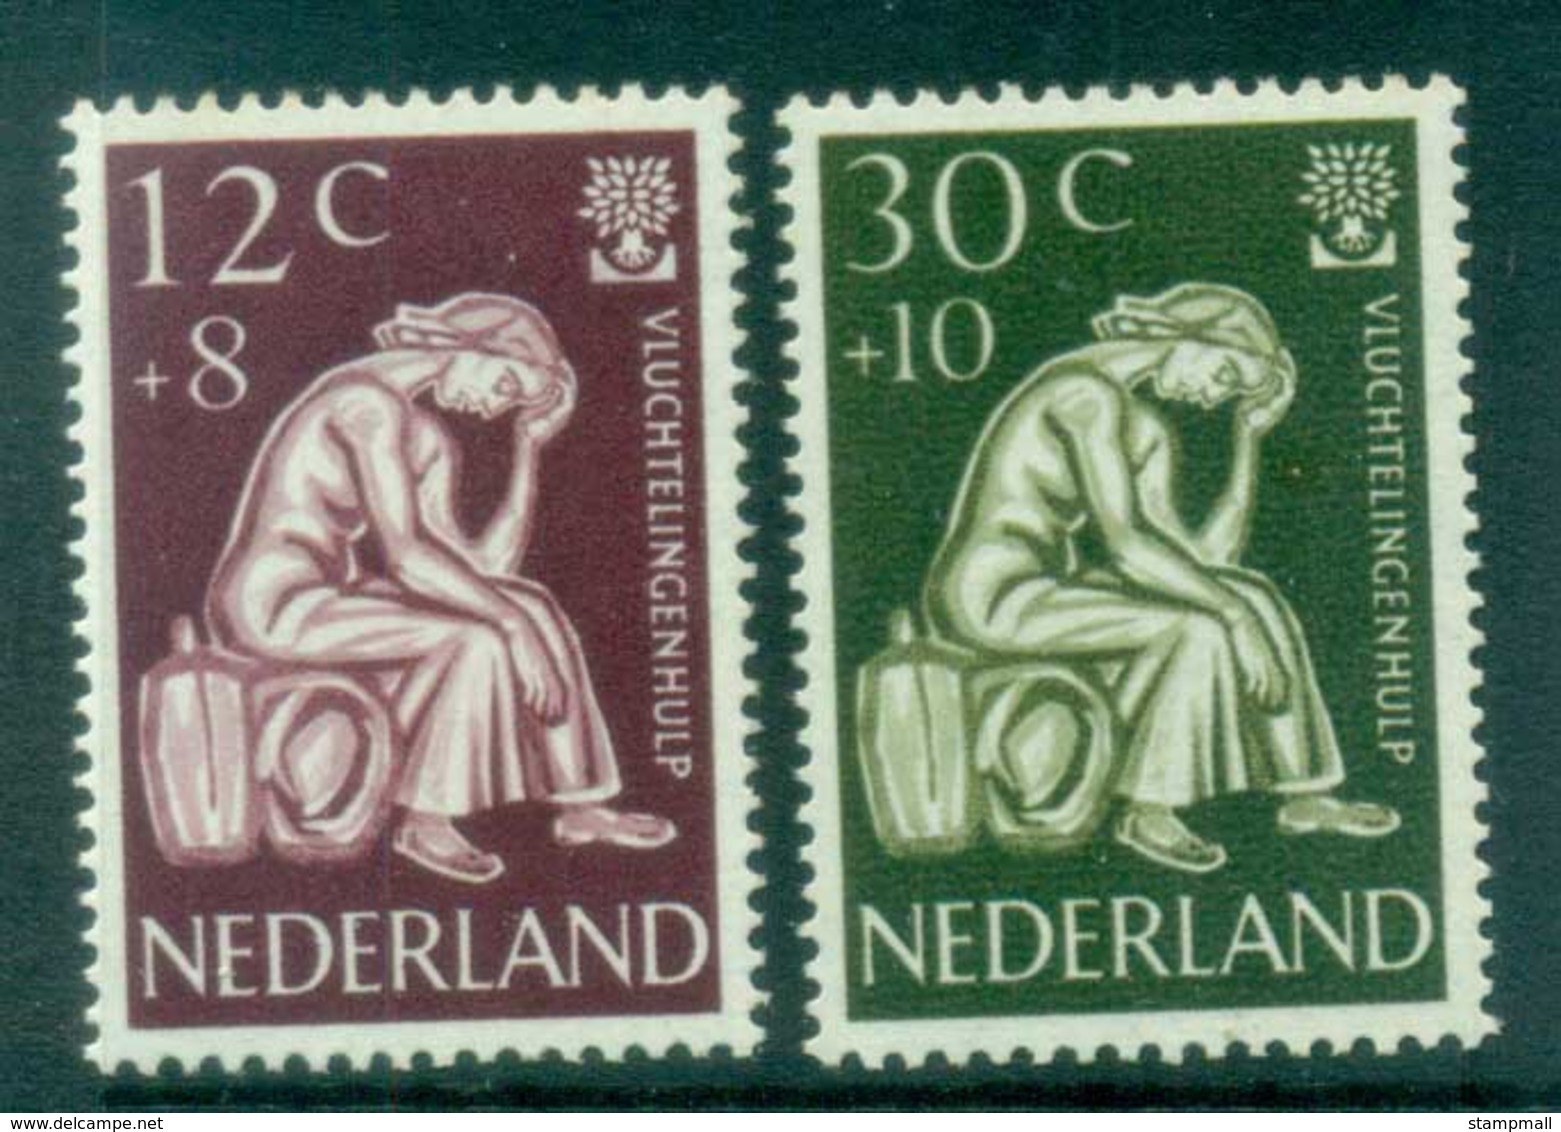 Netherlands 1960 Charity, World Refugee Year MLH Lot76516 - Unclassified